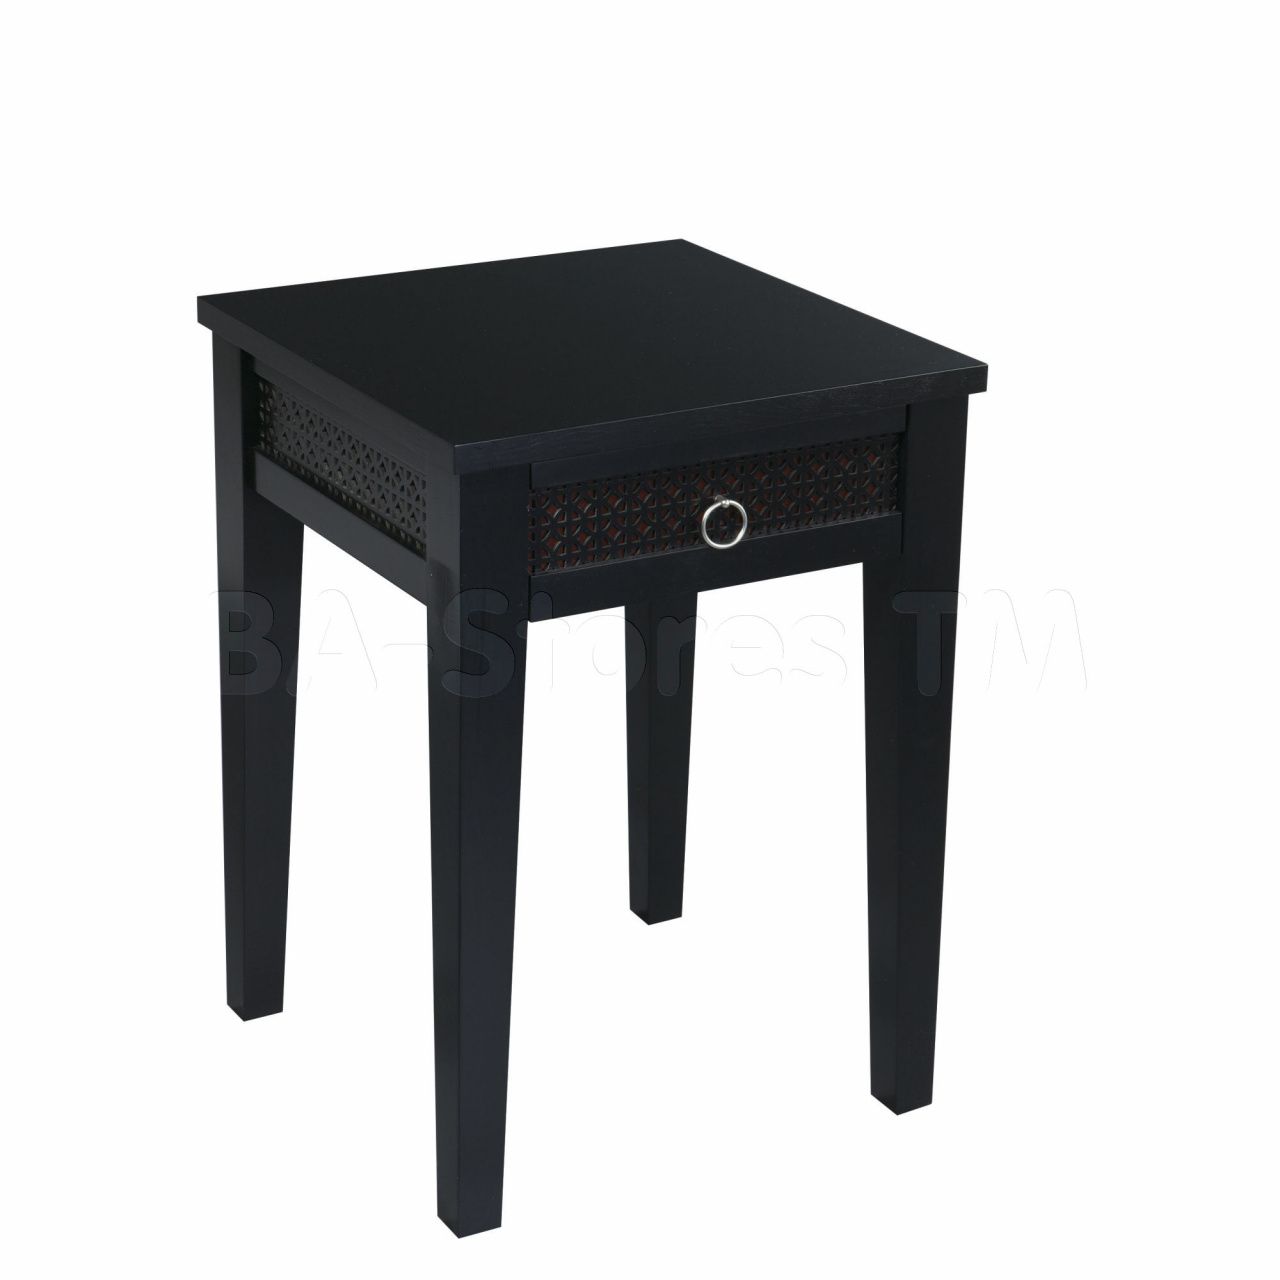 pin annora the sofa interior table black accent small tall with drawer home office desk furniture check more narrow glass country end tables ashley lift coffee blue oriental lamps